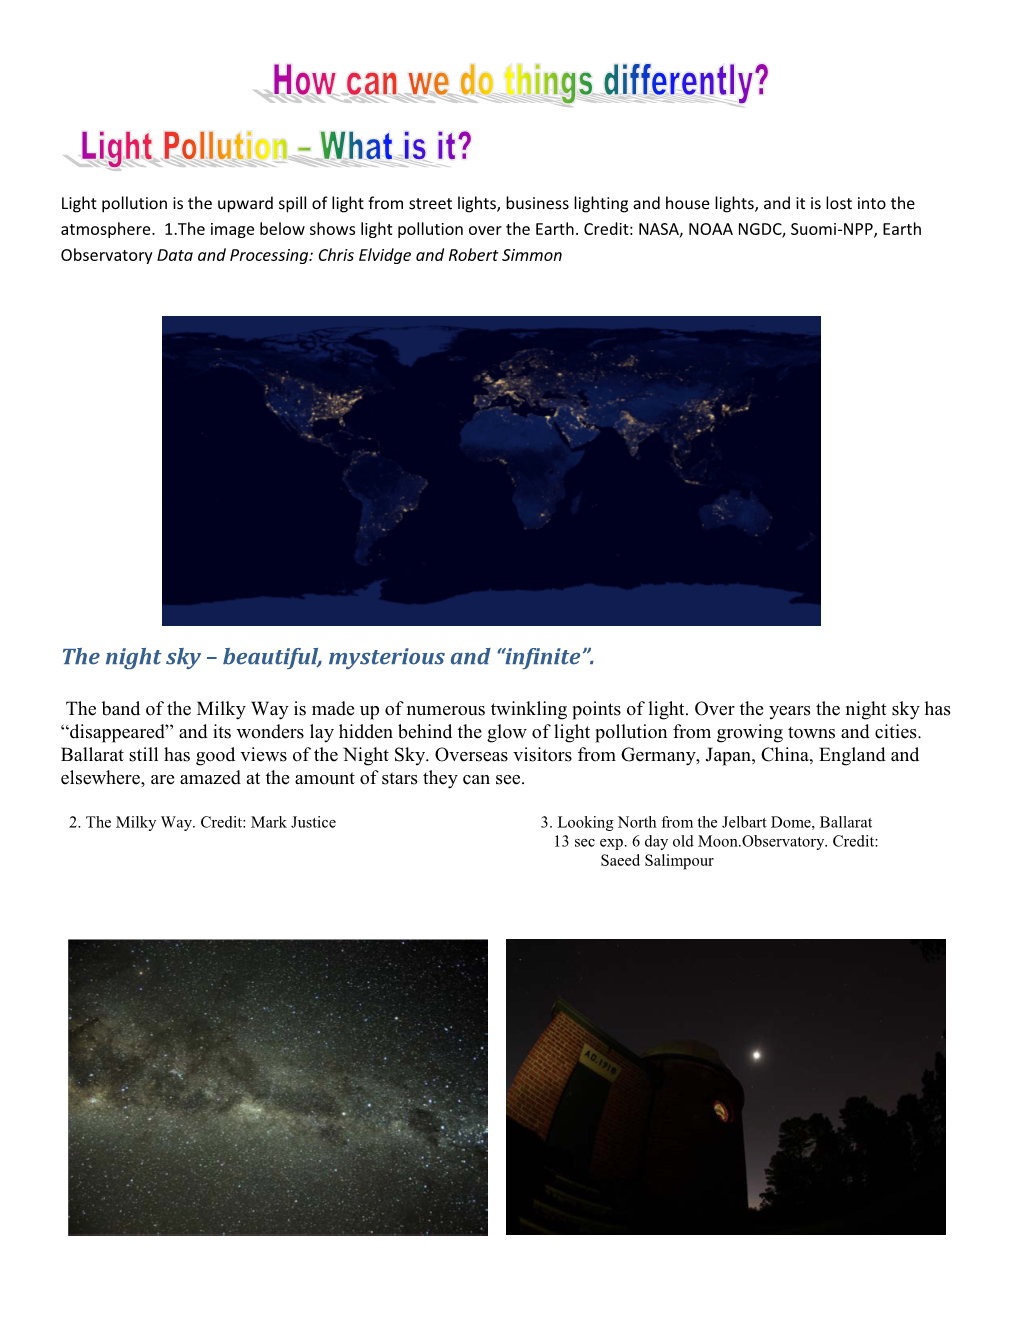 The Night Sky – Beautiful, Mysterious and “Infinite”